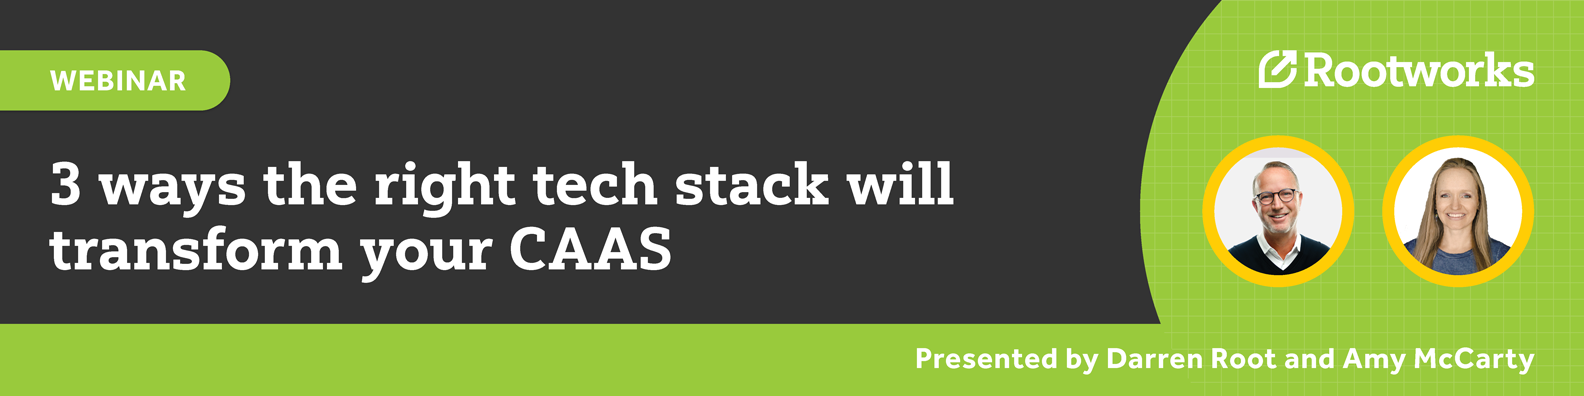 3 ways to the right tech stack